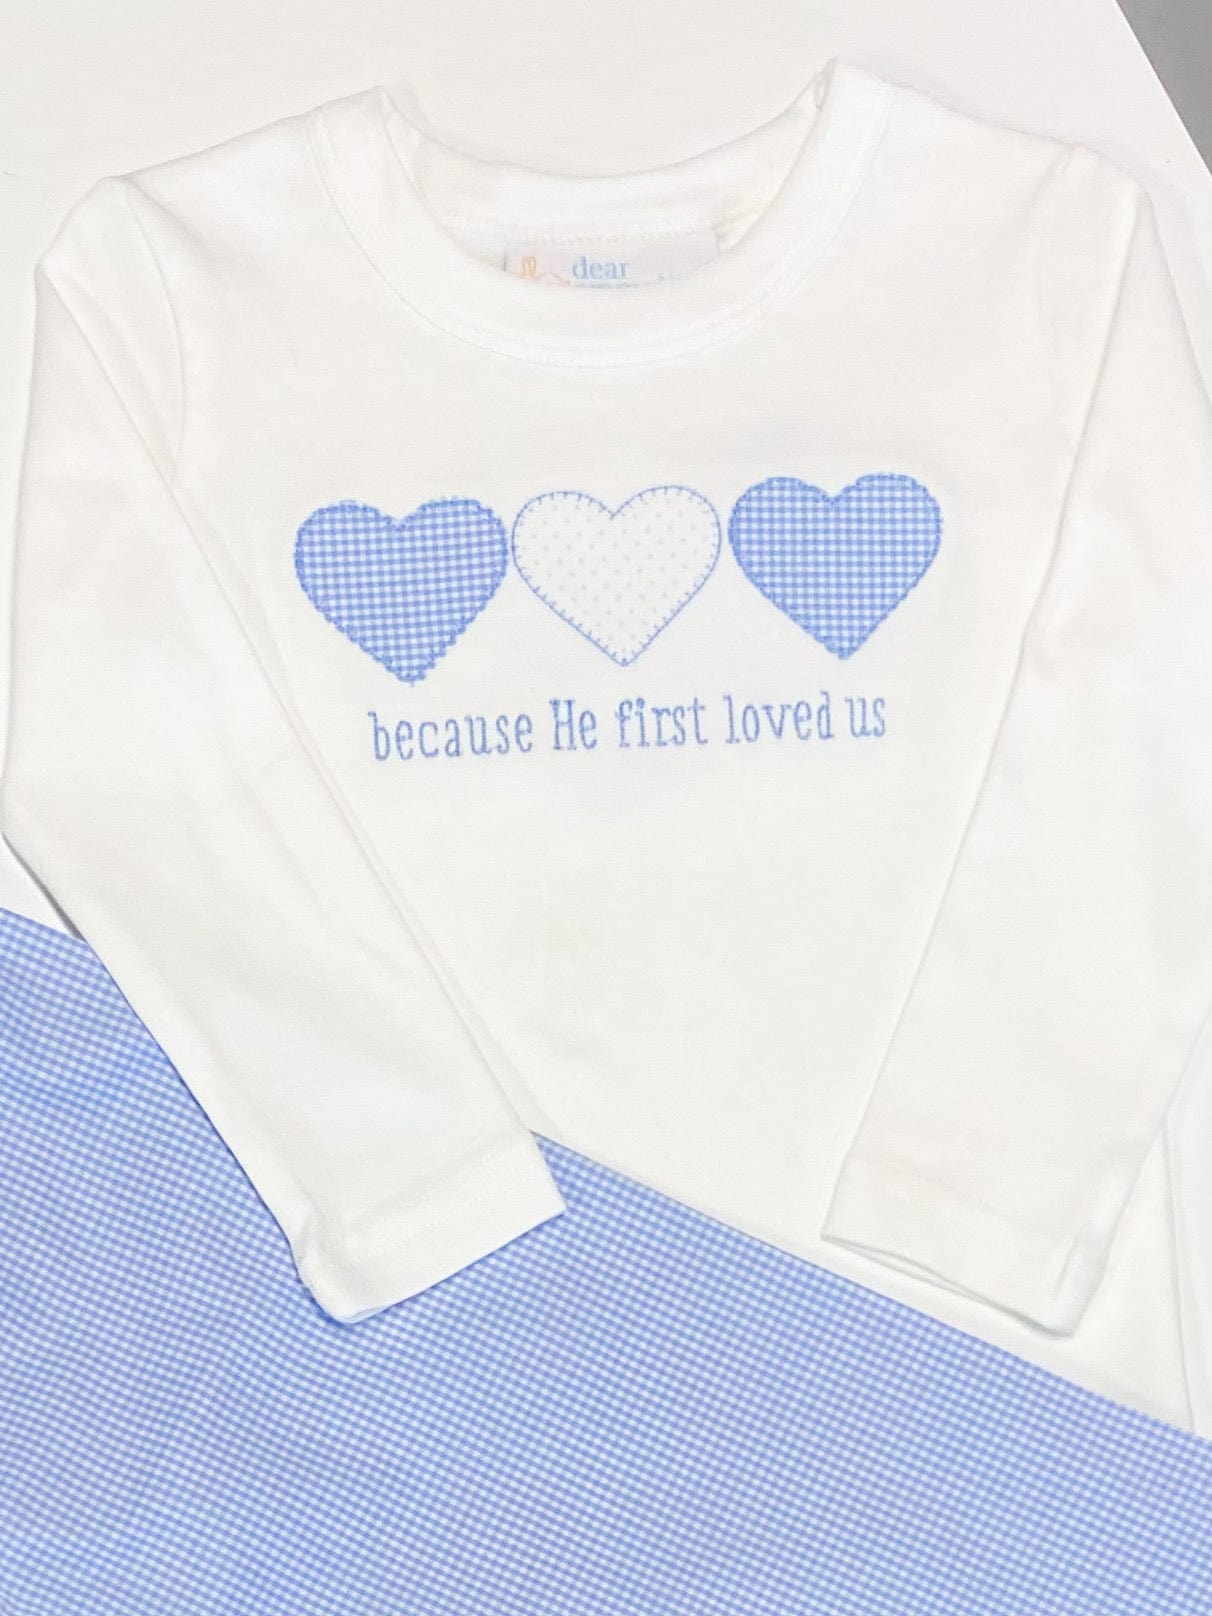 Boys "because He first loved us" Shirt